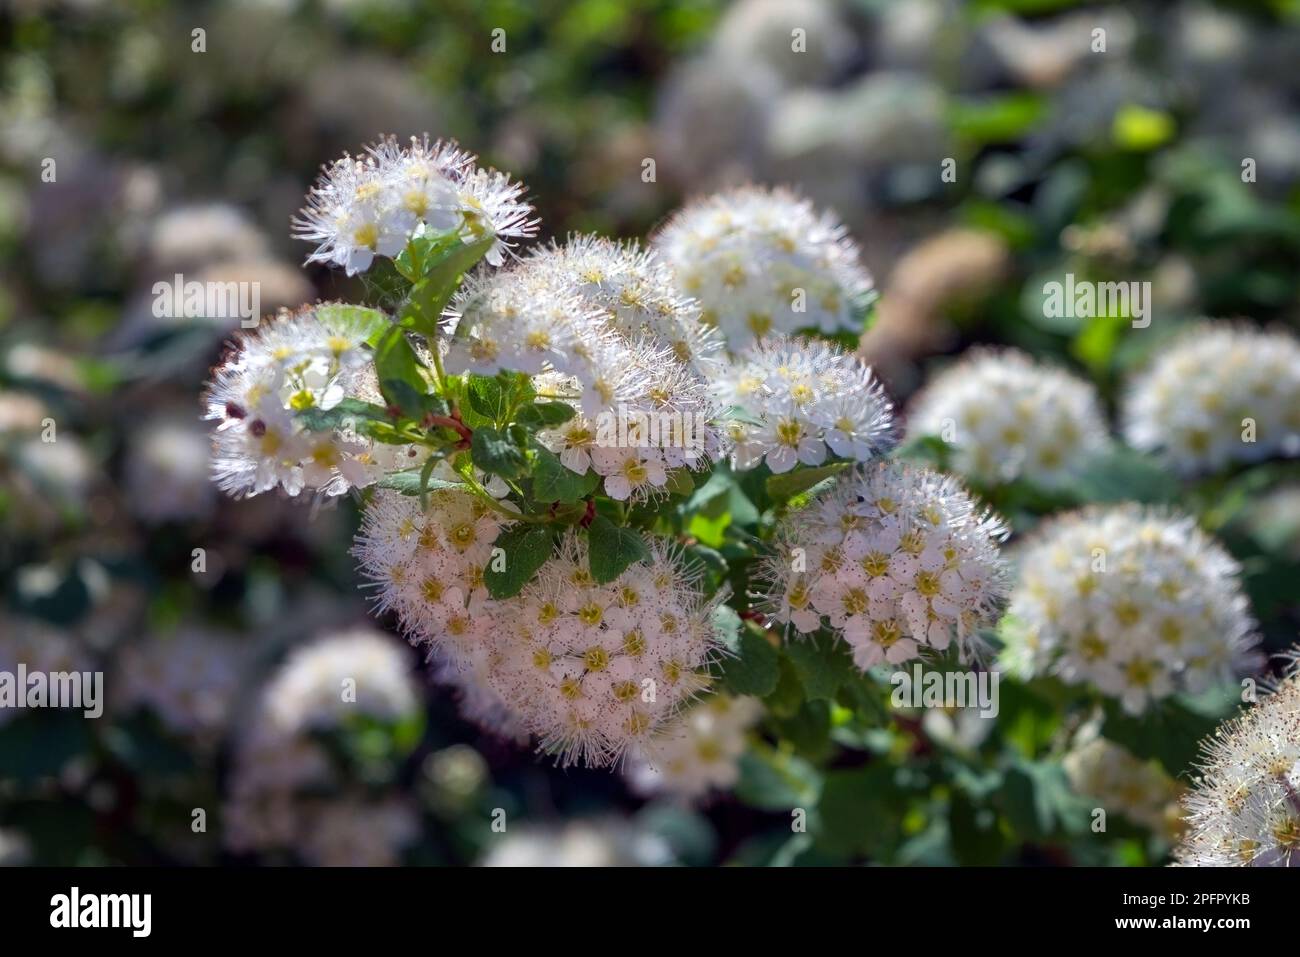 Oak-leaved spirea Spiraea chamaedryfolia blooms luxuriantly with small white flowers in the garden. Stock Photo